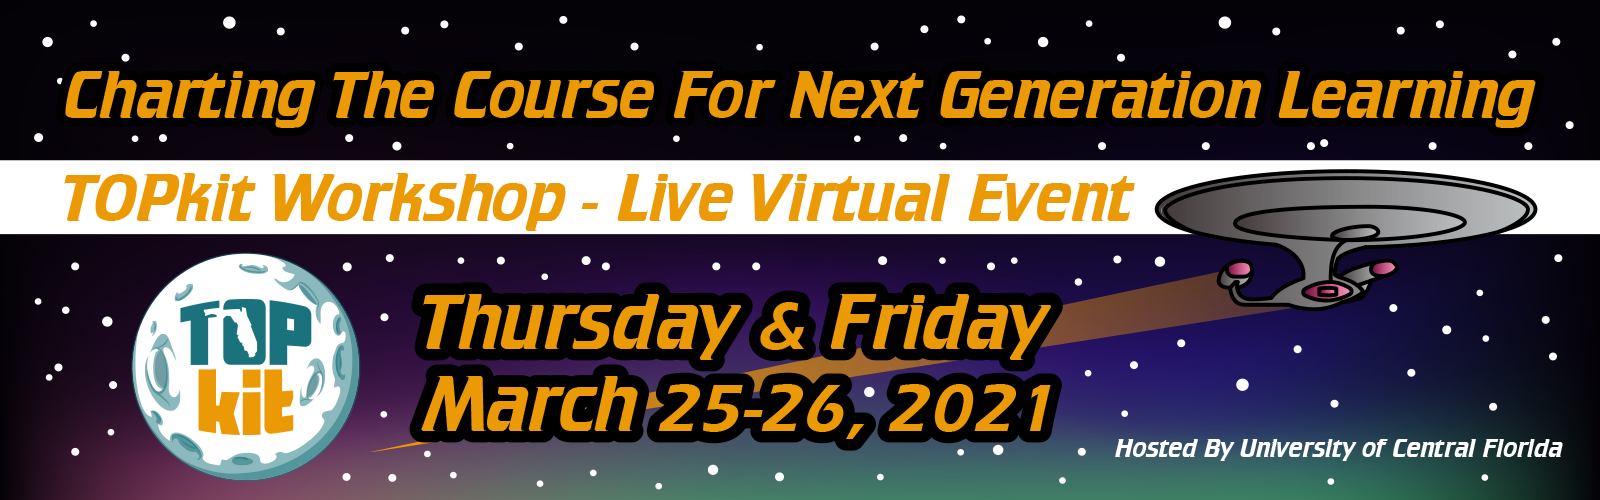 Charting the Course for Next Generation Learning: TOPkit Workshop - Live Virtual Event to occur on Thursday & Friday, March 25-26, 2021